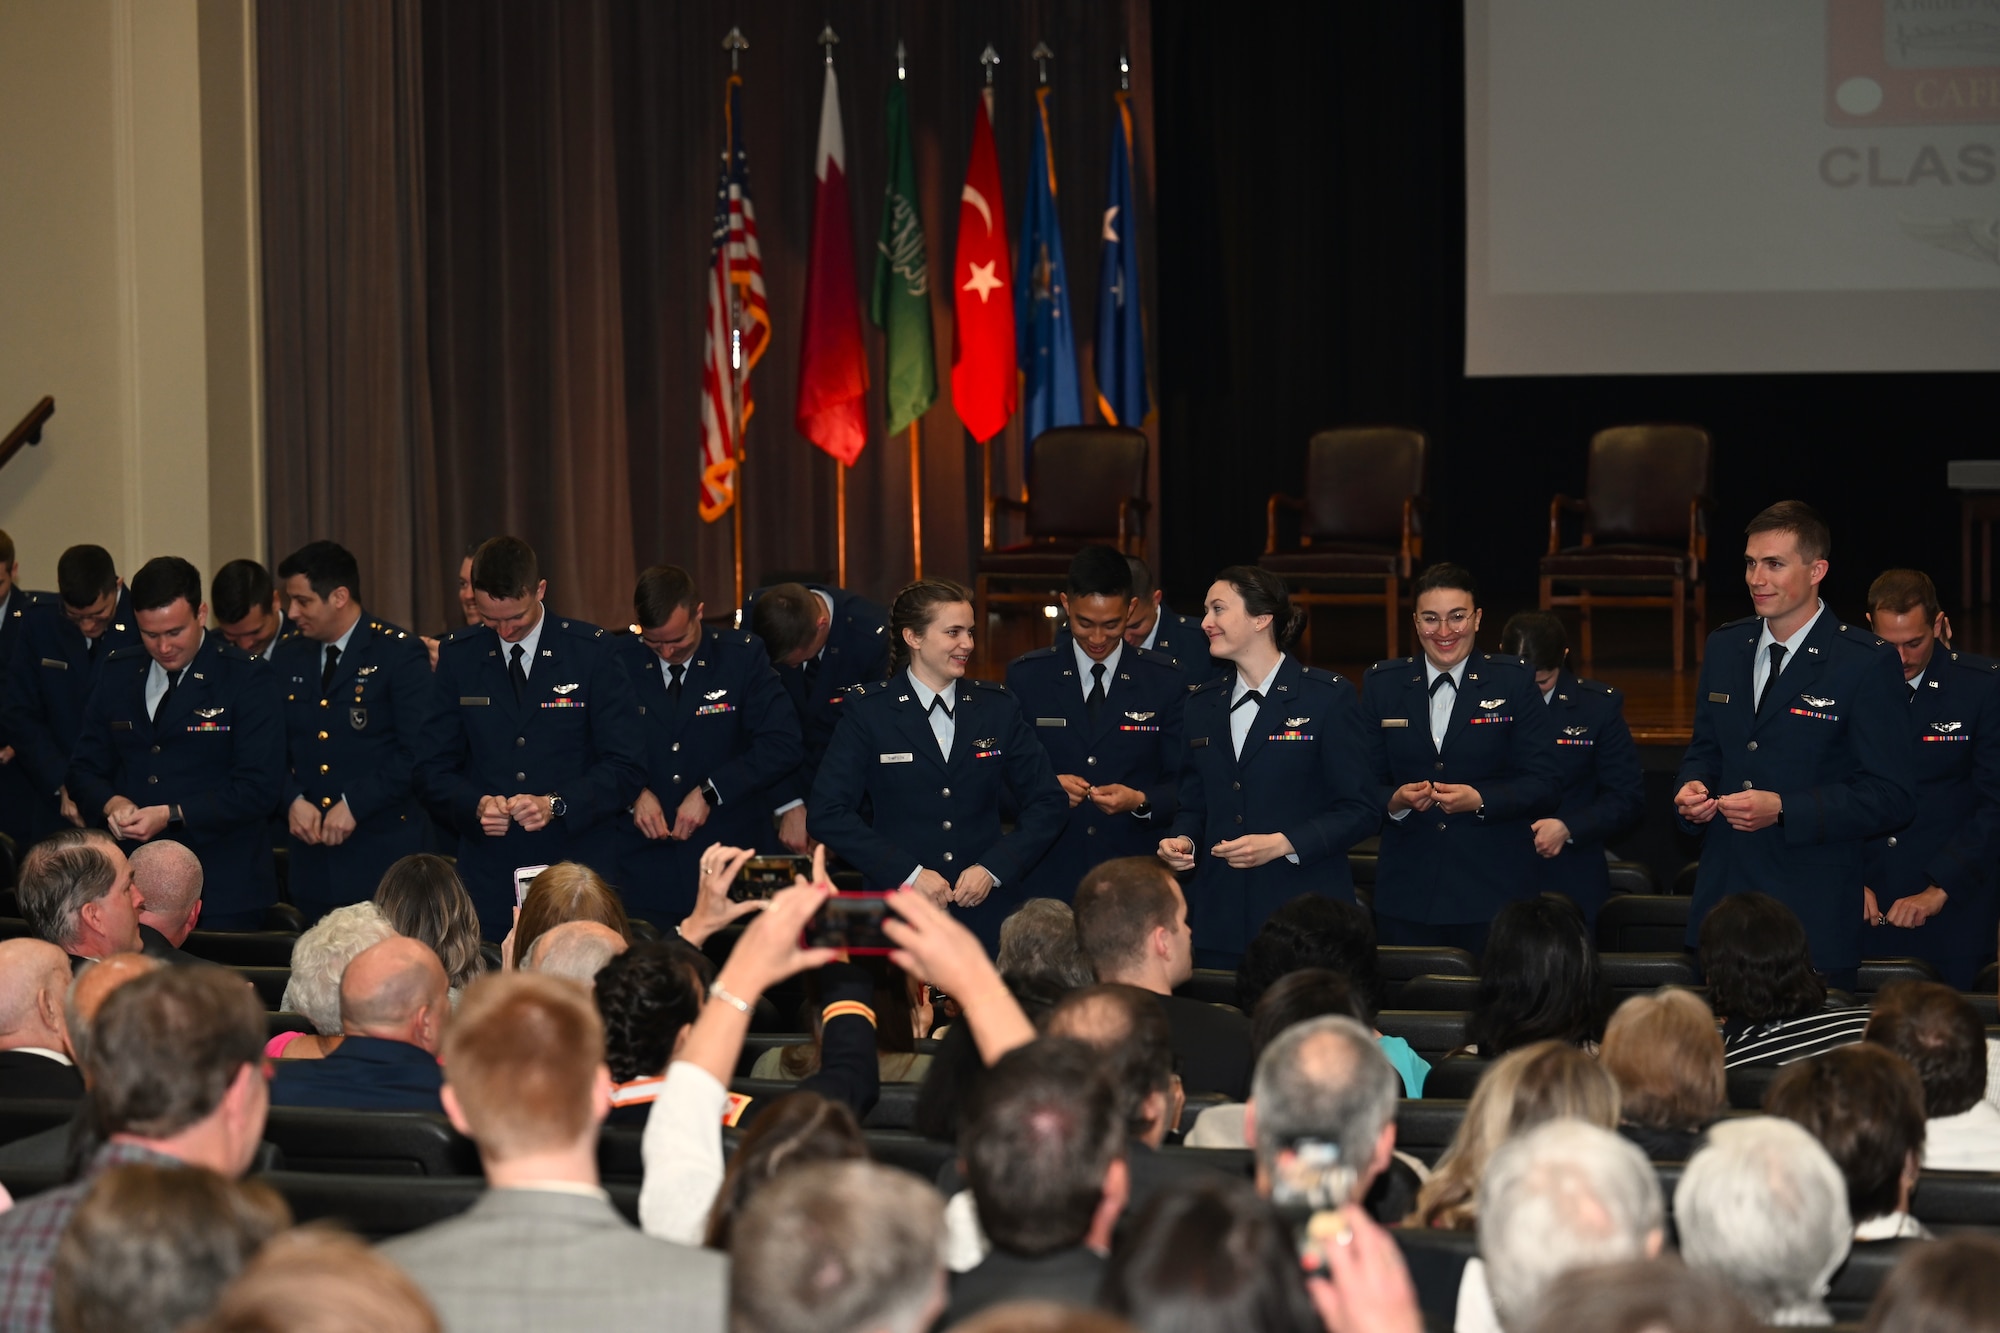 Graduates from Specialized Undergraduate Pilot Training class 22-07, break their first pair of wings, during their graduation ceremony, Mar. 25, 2022 on Columbus Air Force Base, Miss. During a long-standing aviation tradition, pilots will keep one half of the broken wings and give the second half to a loved one. The two halves are never to be brought back together while the pilot is still alive. (U.S Air Force photo by Airman 1st Class Jessica Haynie)